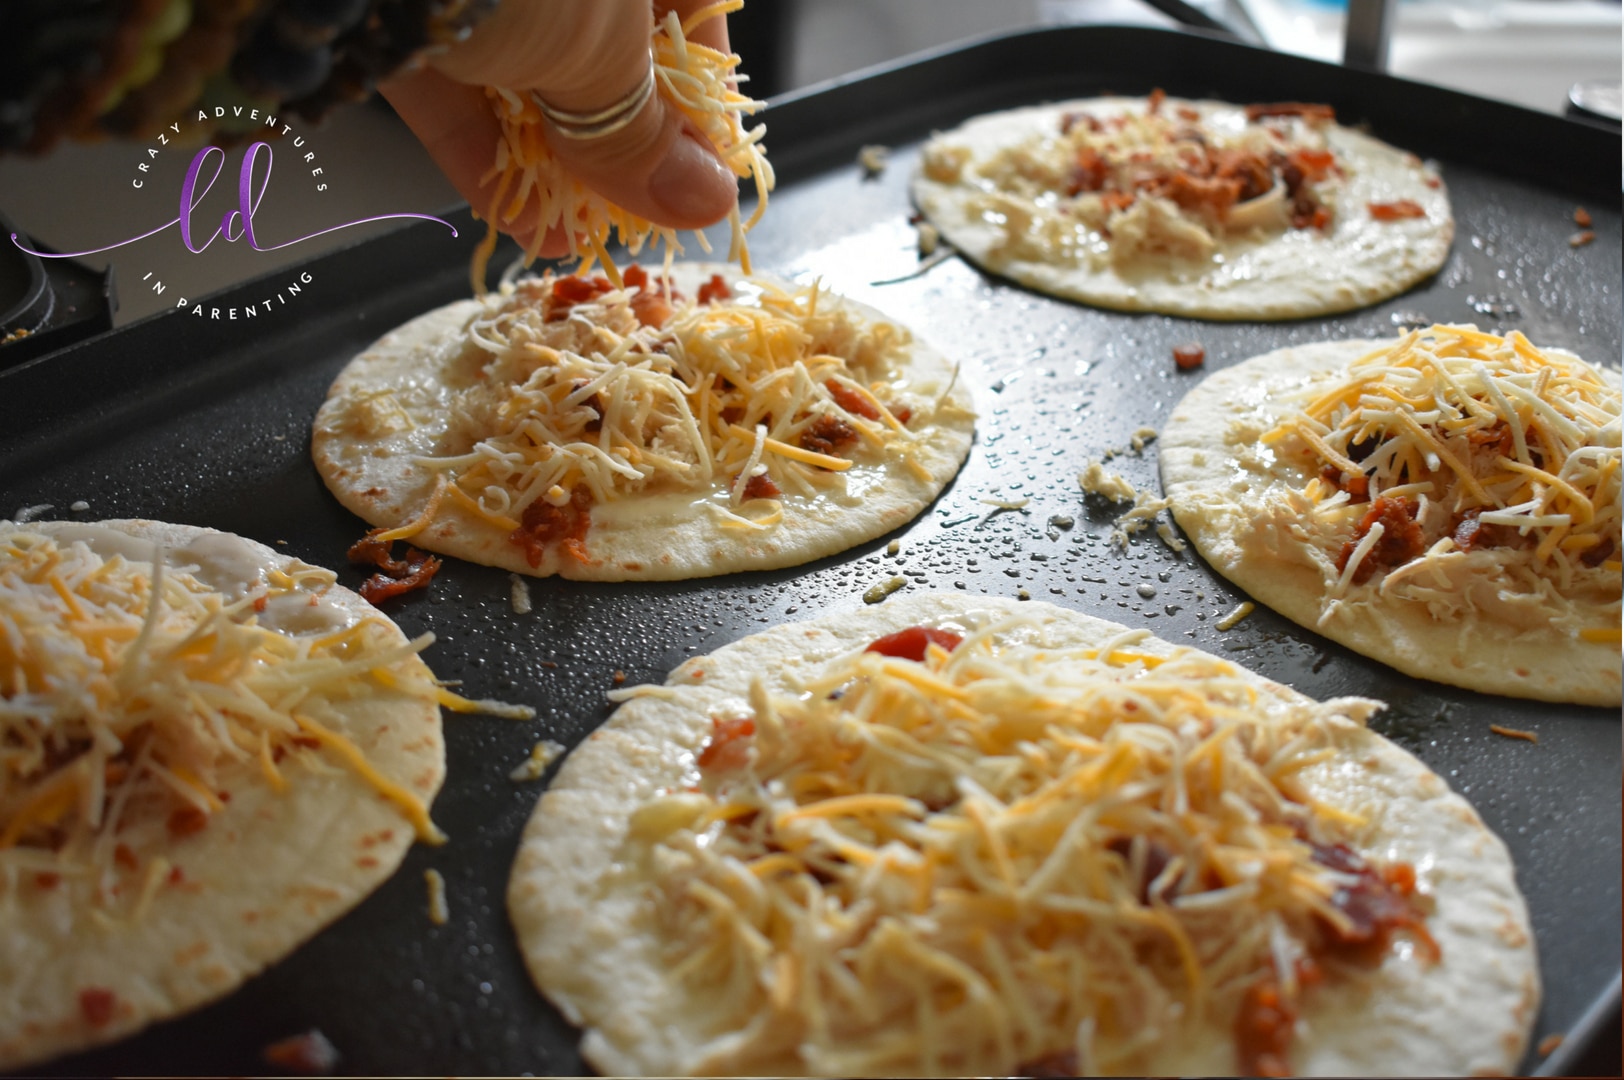 Sprinkle Shredded Cheese on Chicken Bacon Ranch Quesadillas